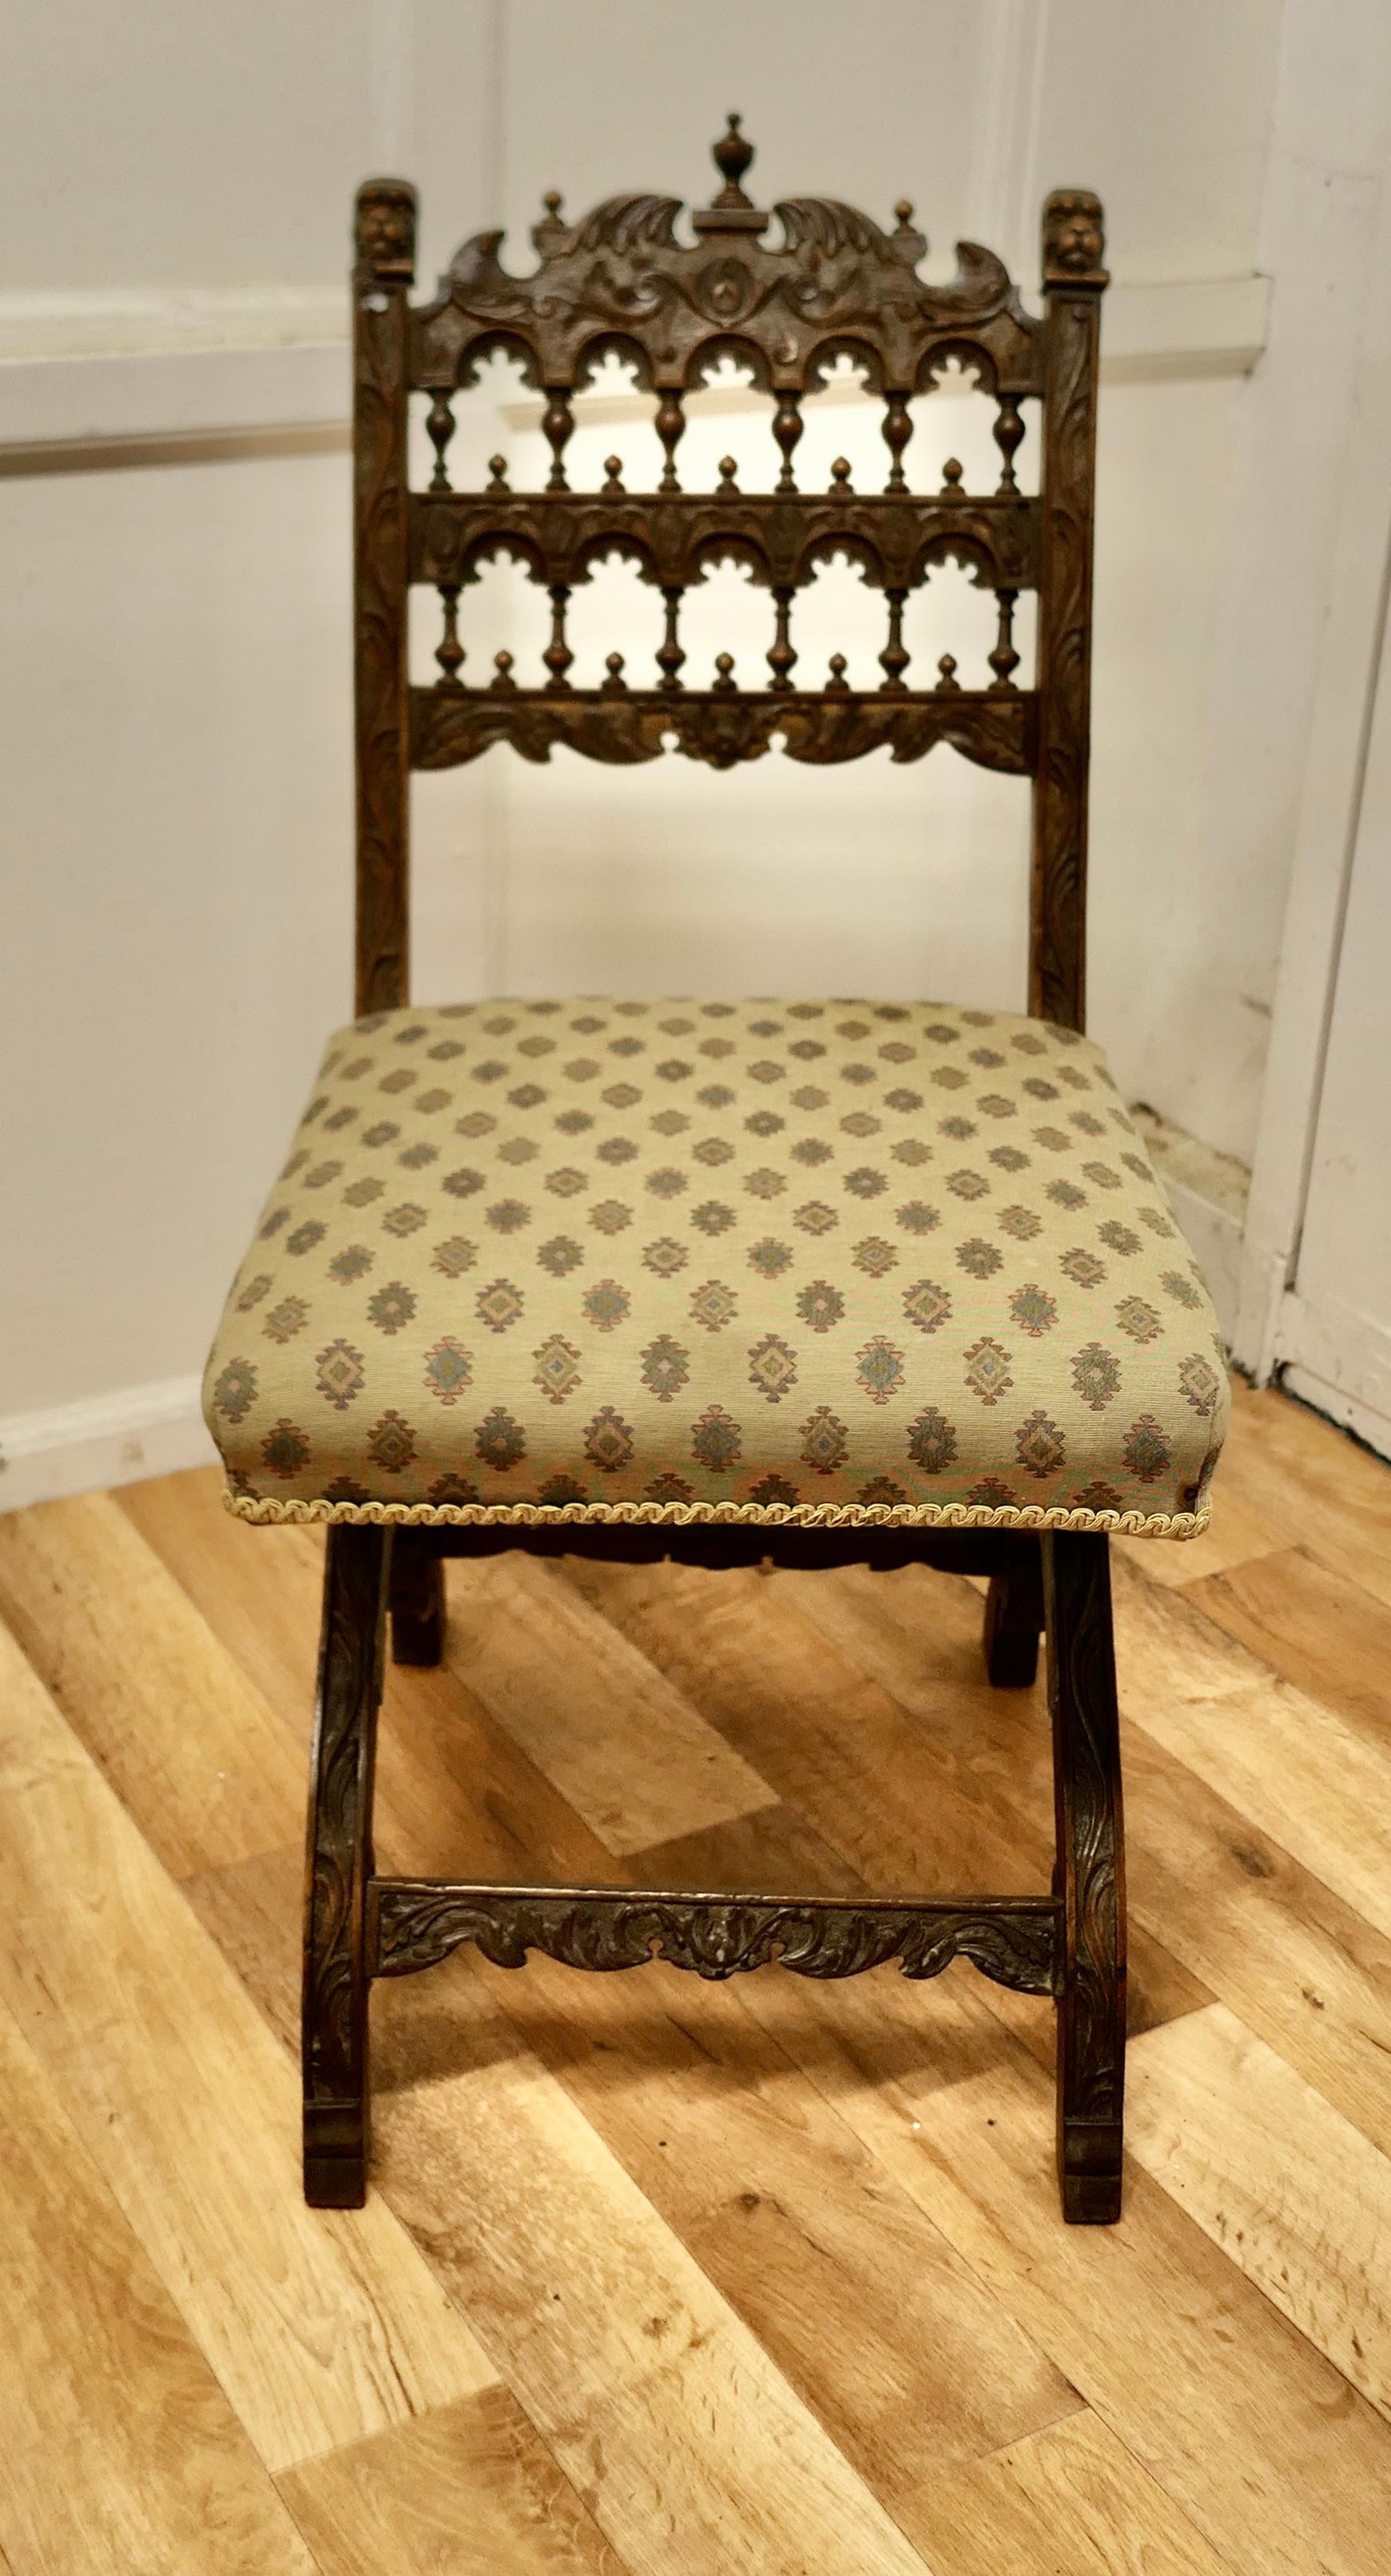 Arts and Crafts Gothic X Frame Carved Oak chair 

The chair has a very detailed carved and gilded frame with Lions faces on each side of the back. The chair is set on an X Frame which is also carved and it has old woven silk upholstery, the chair